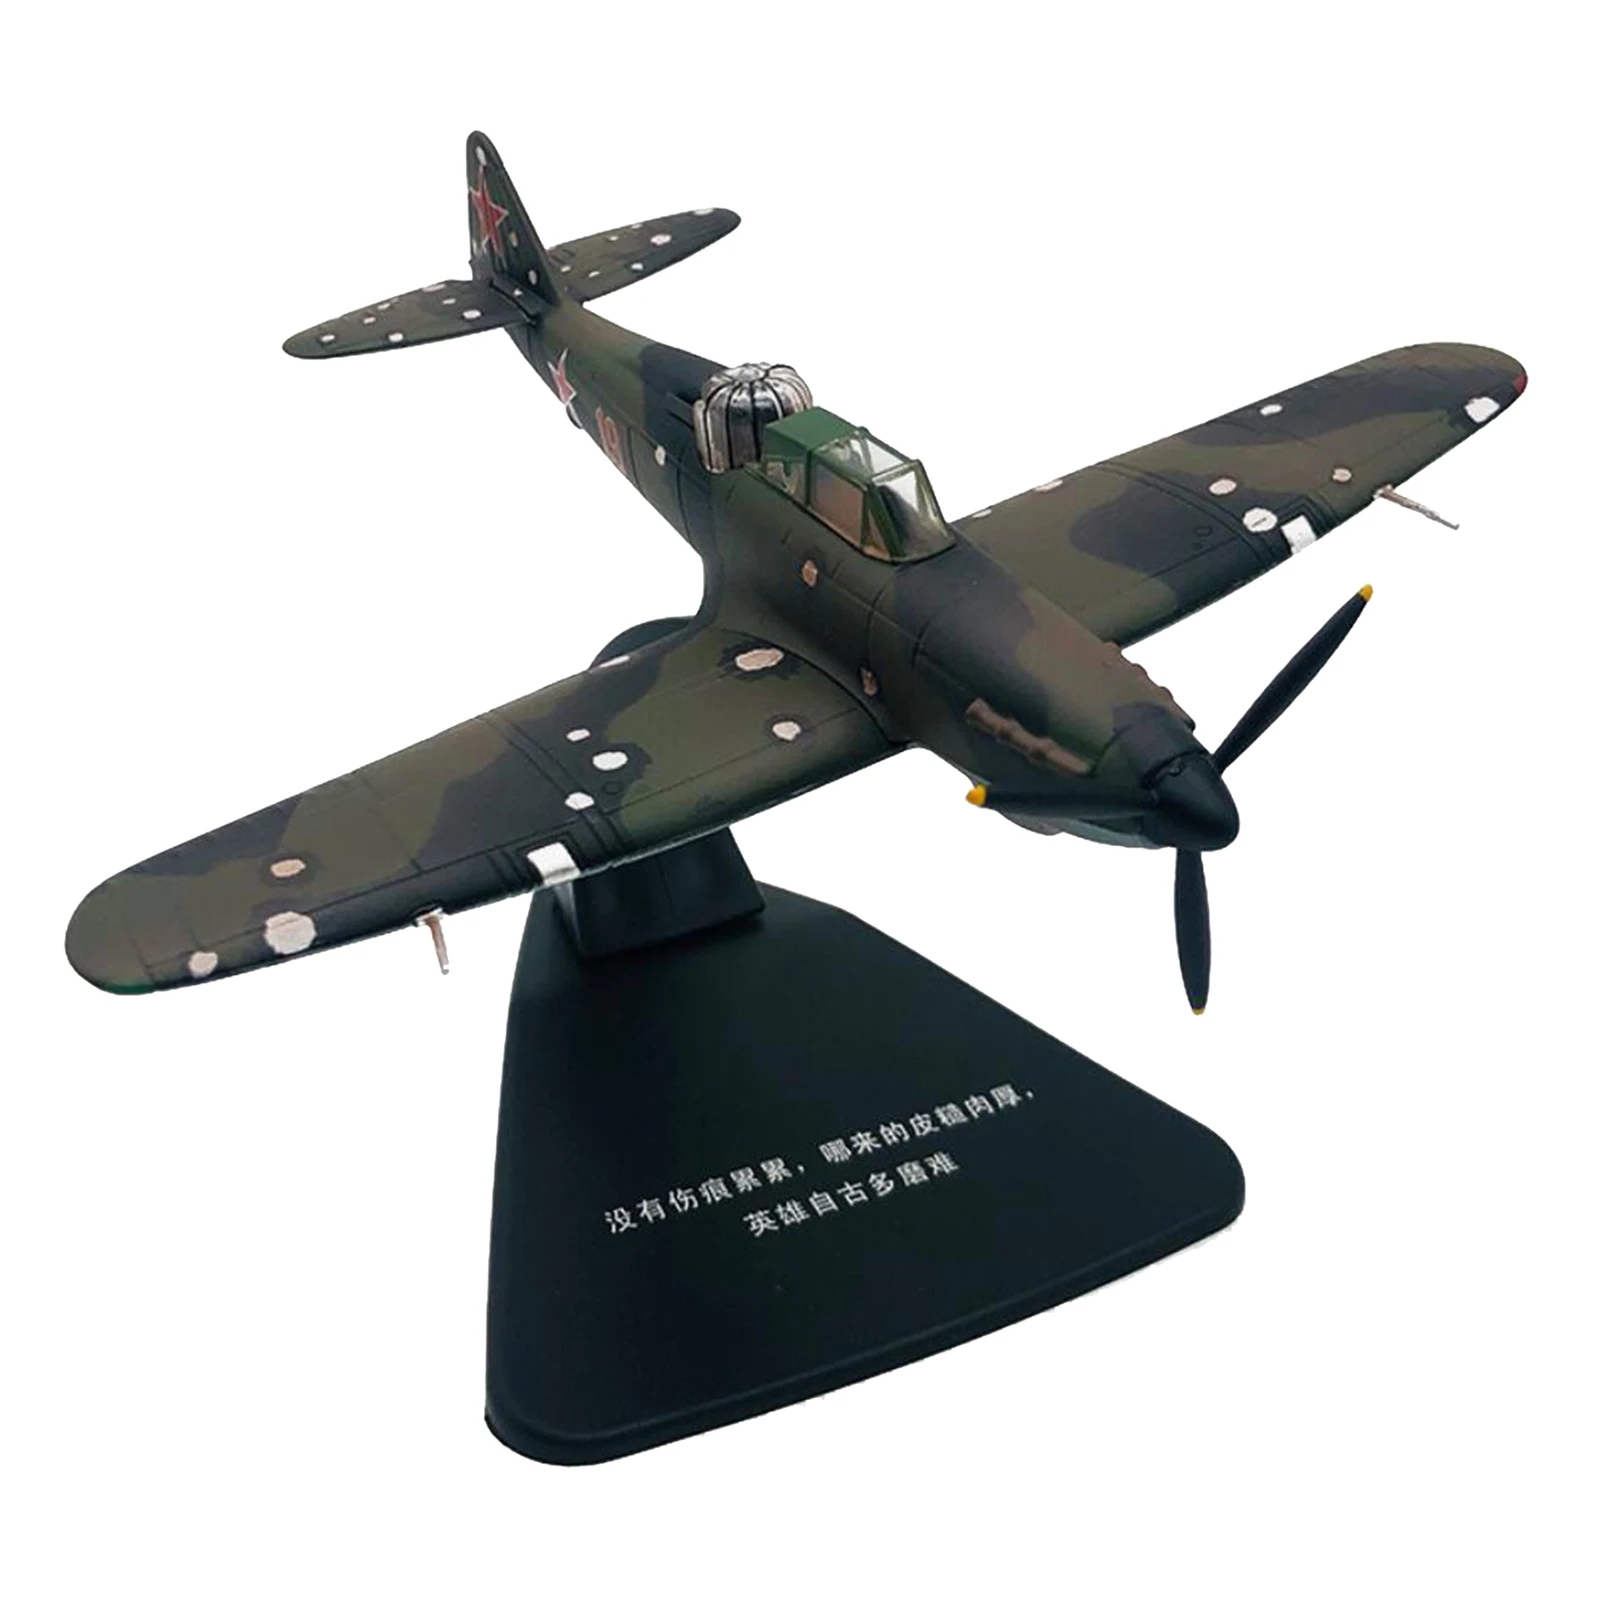 

1:76 Diecast Alloy WWII IL-2 Attacker Aircraft Fighter Airforce Plane Toys Military Model Tabletop Desk Toy